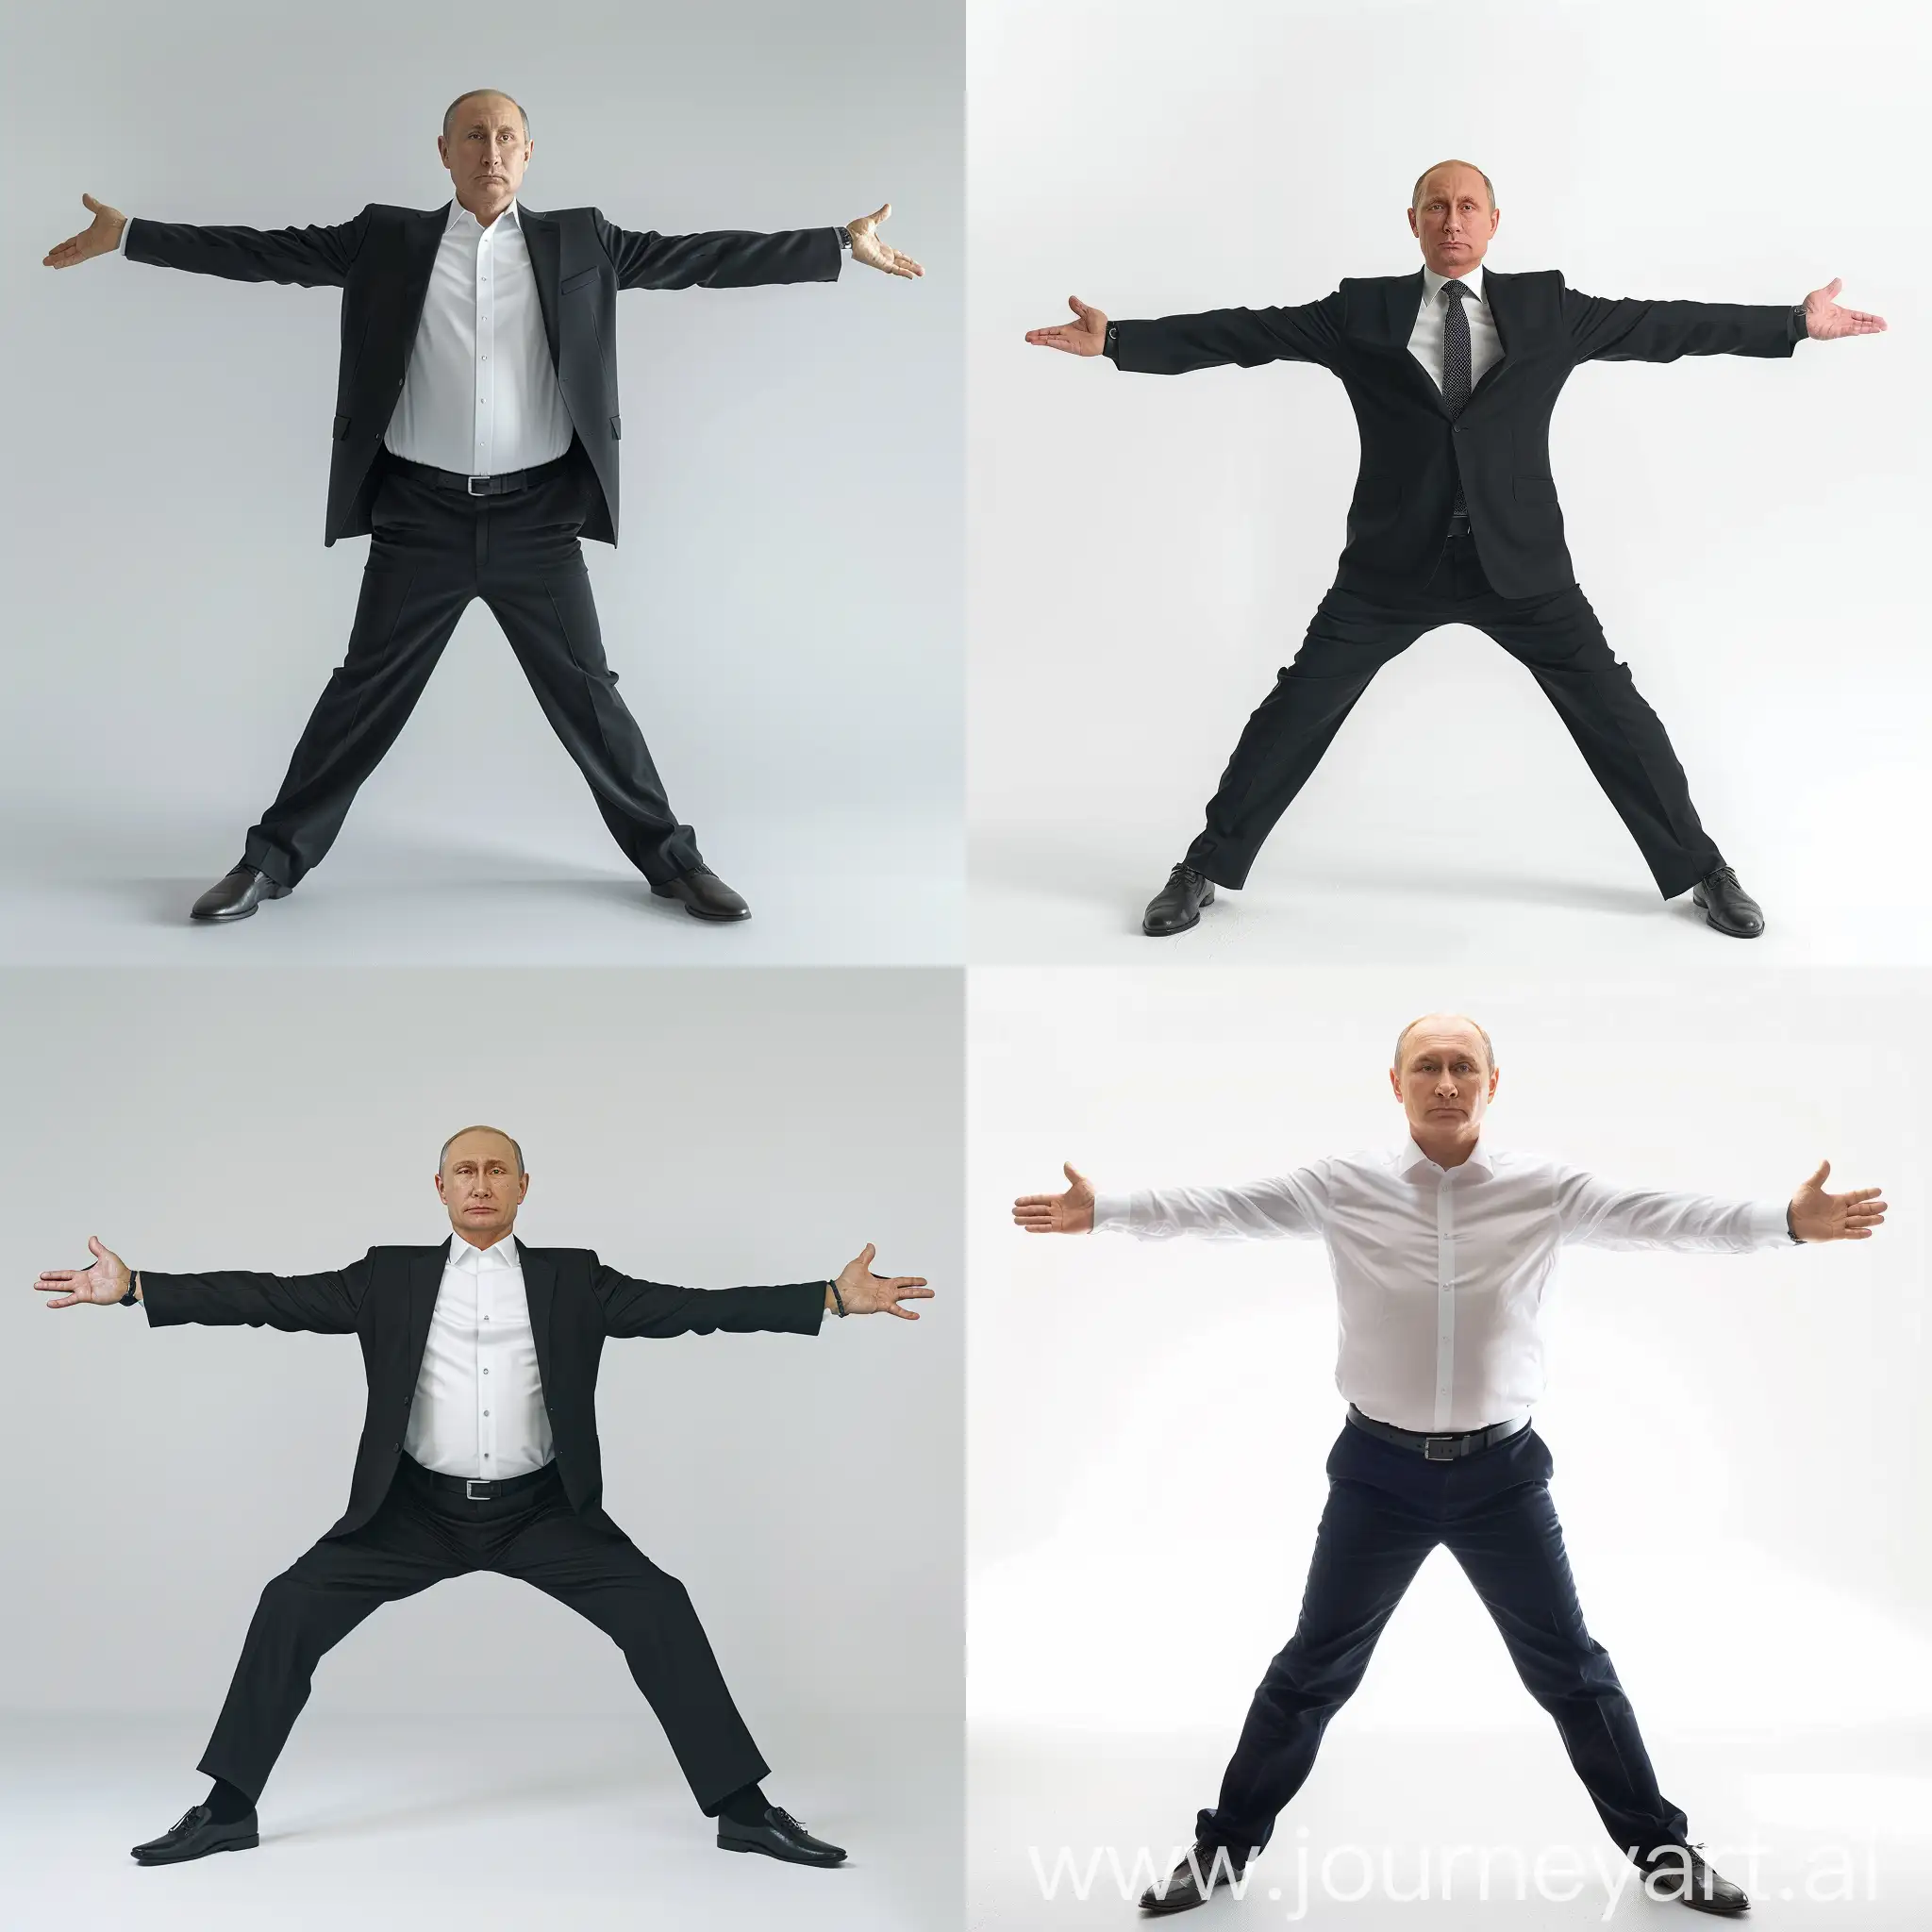 Vladimir-Putin-Stands-Tall-with-Arms-Outstretched-on-White-Background